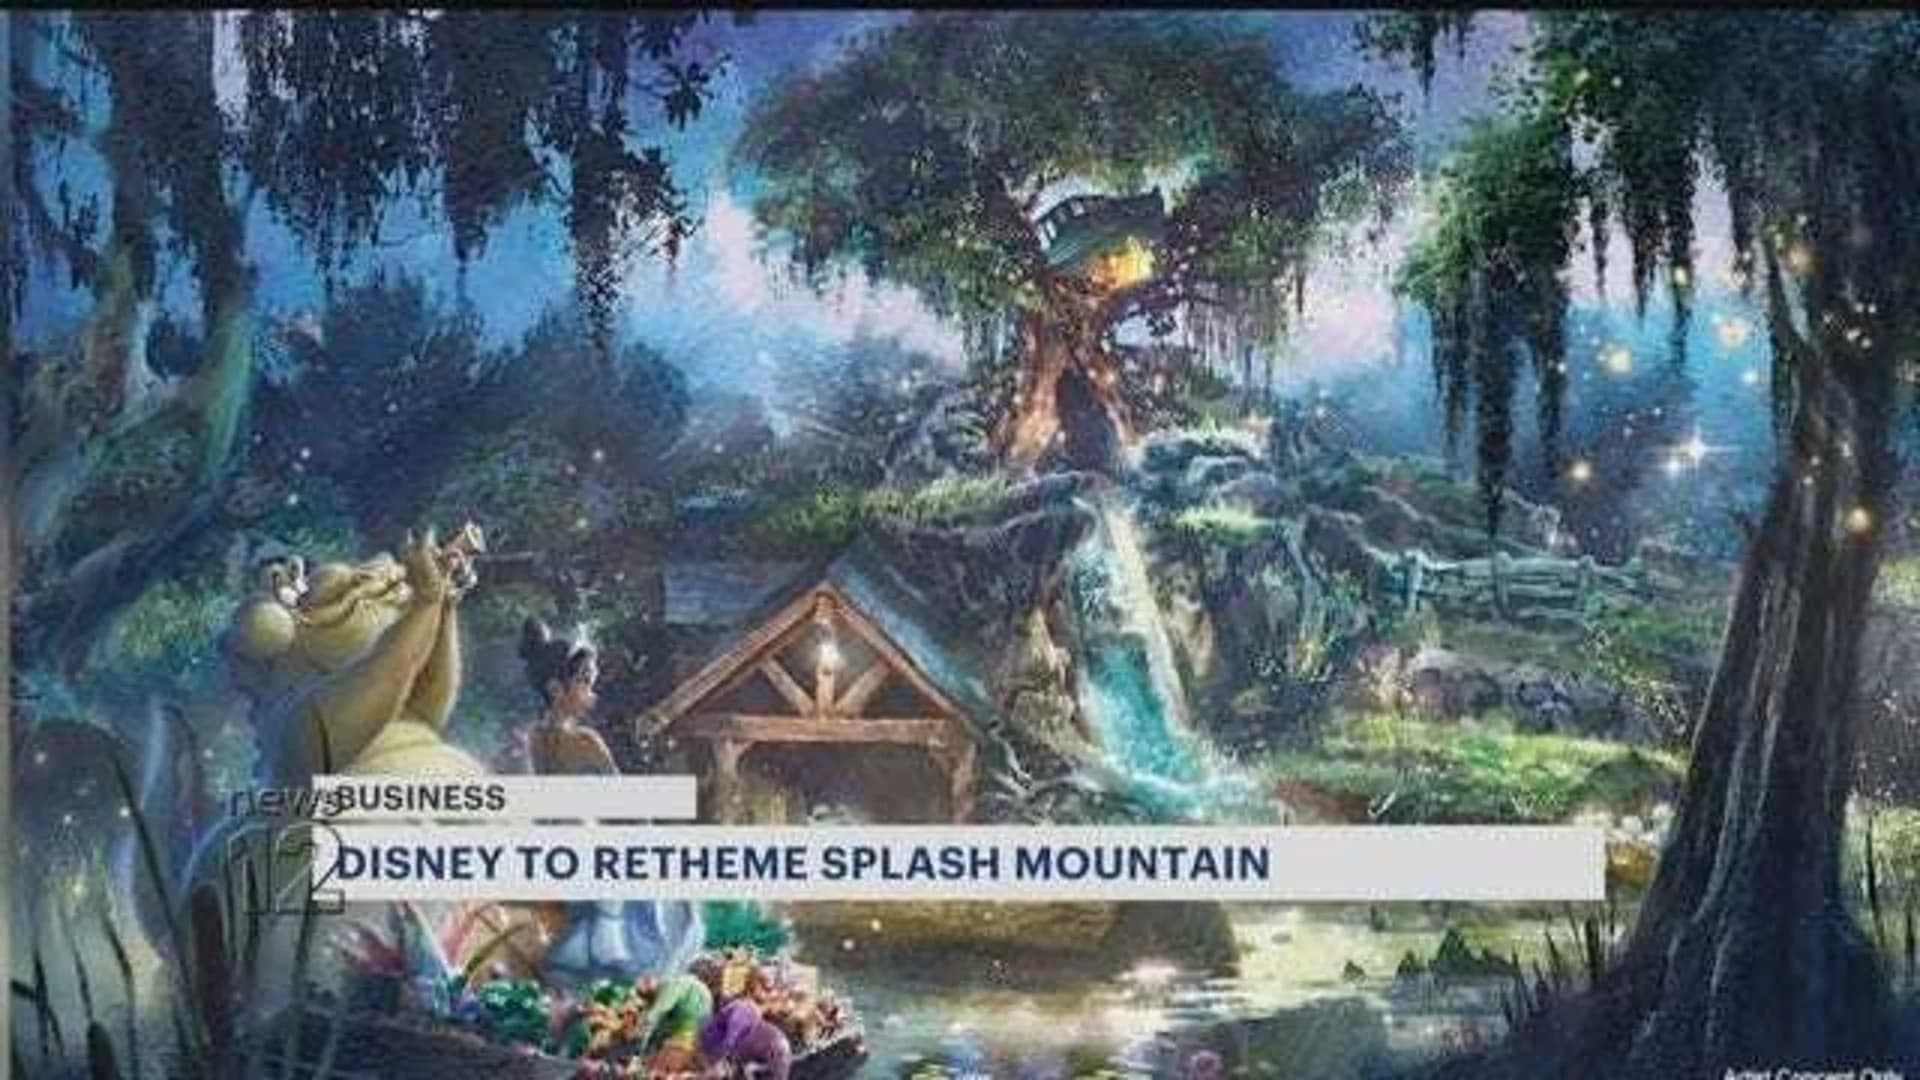 Disney's Splash Mountain to be rethemed to "Princess and the Frog"